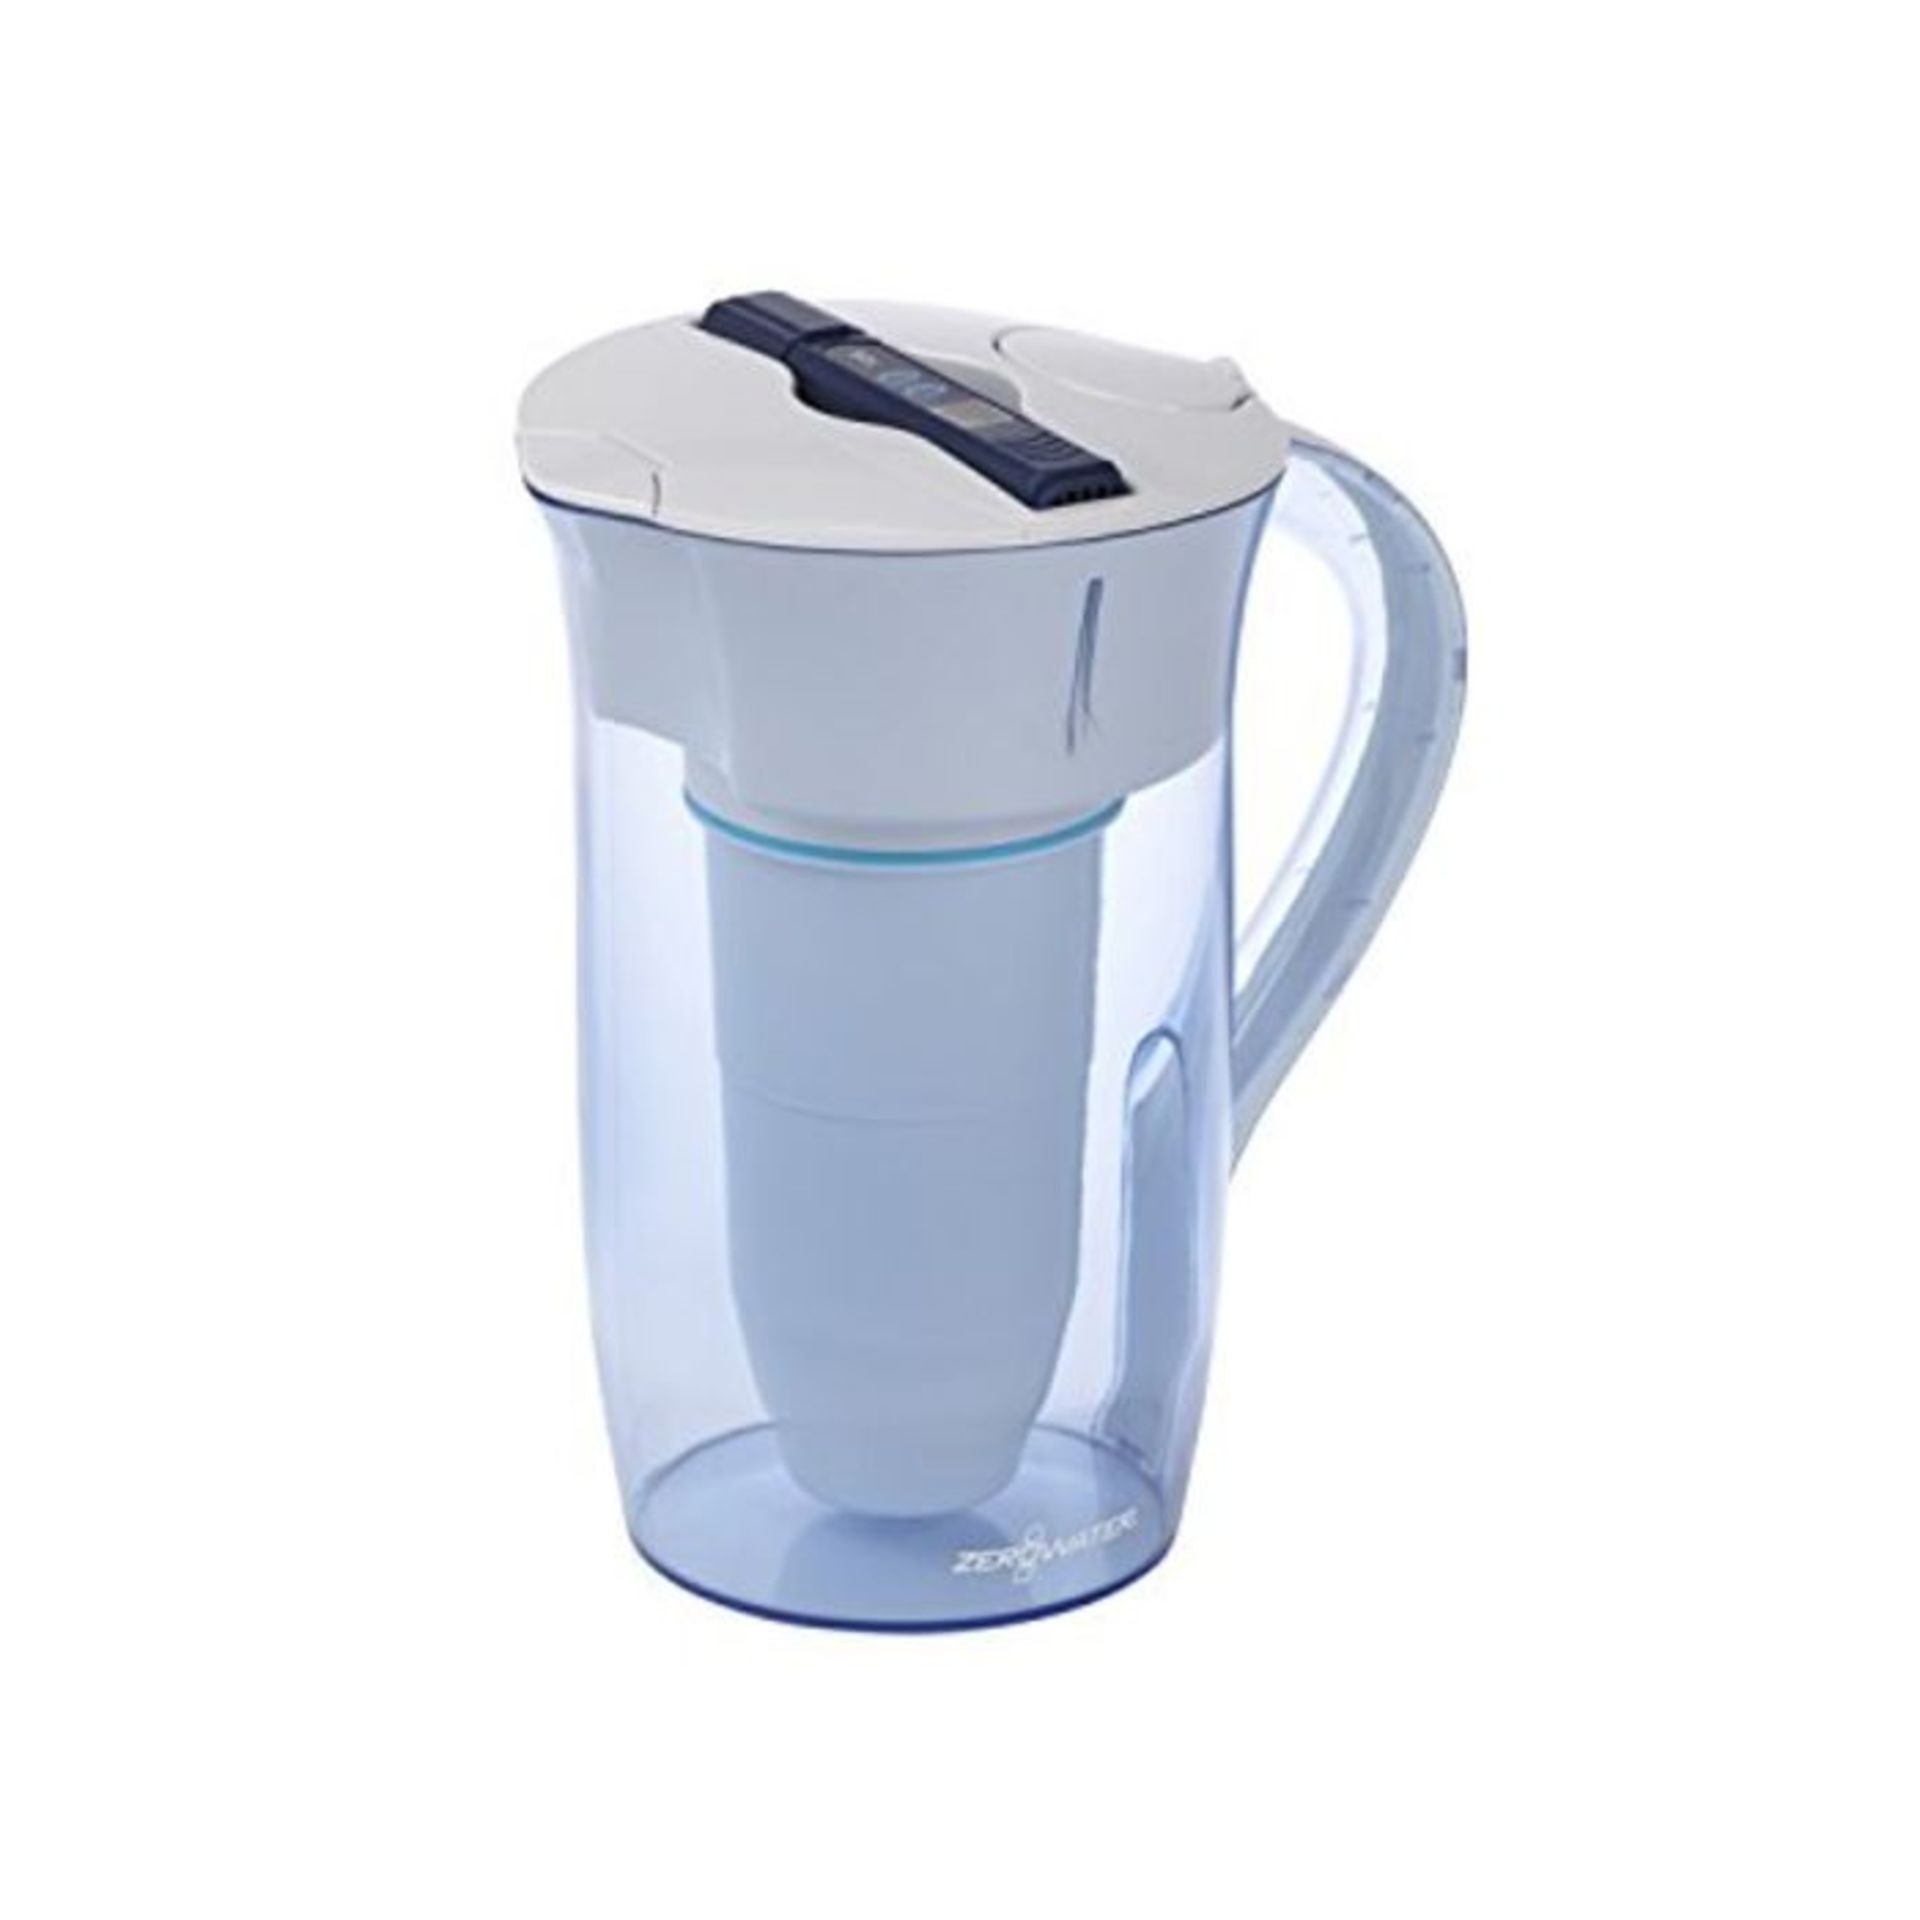 ZeroWater 10 Cup Round Water Filter Jug With Advanced 5 Stage Filter, Water Quality Me